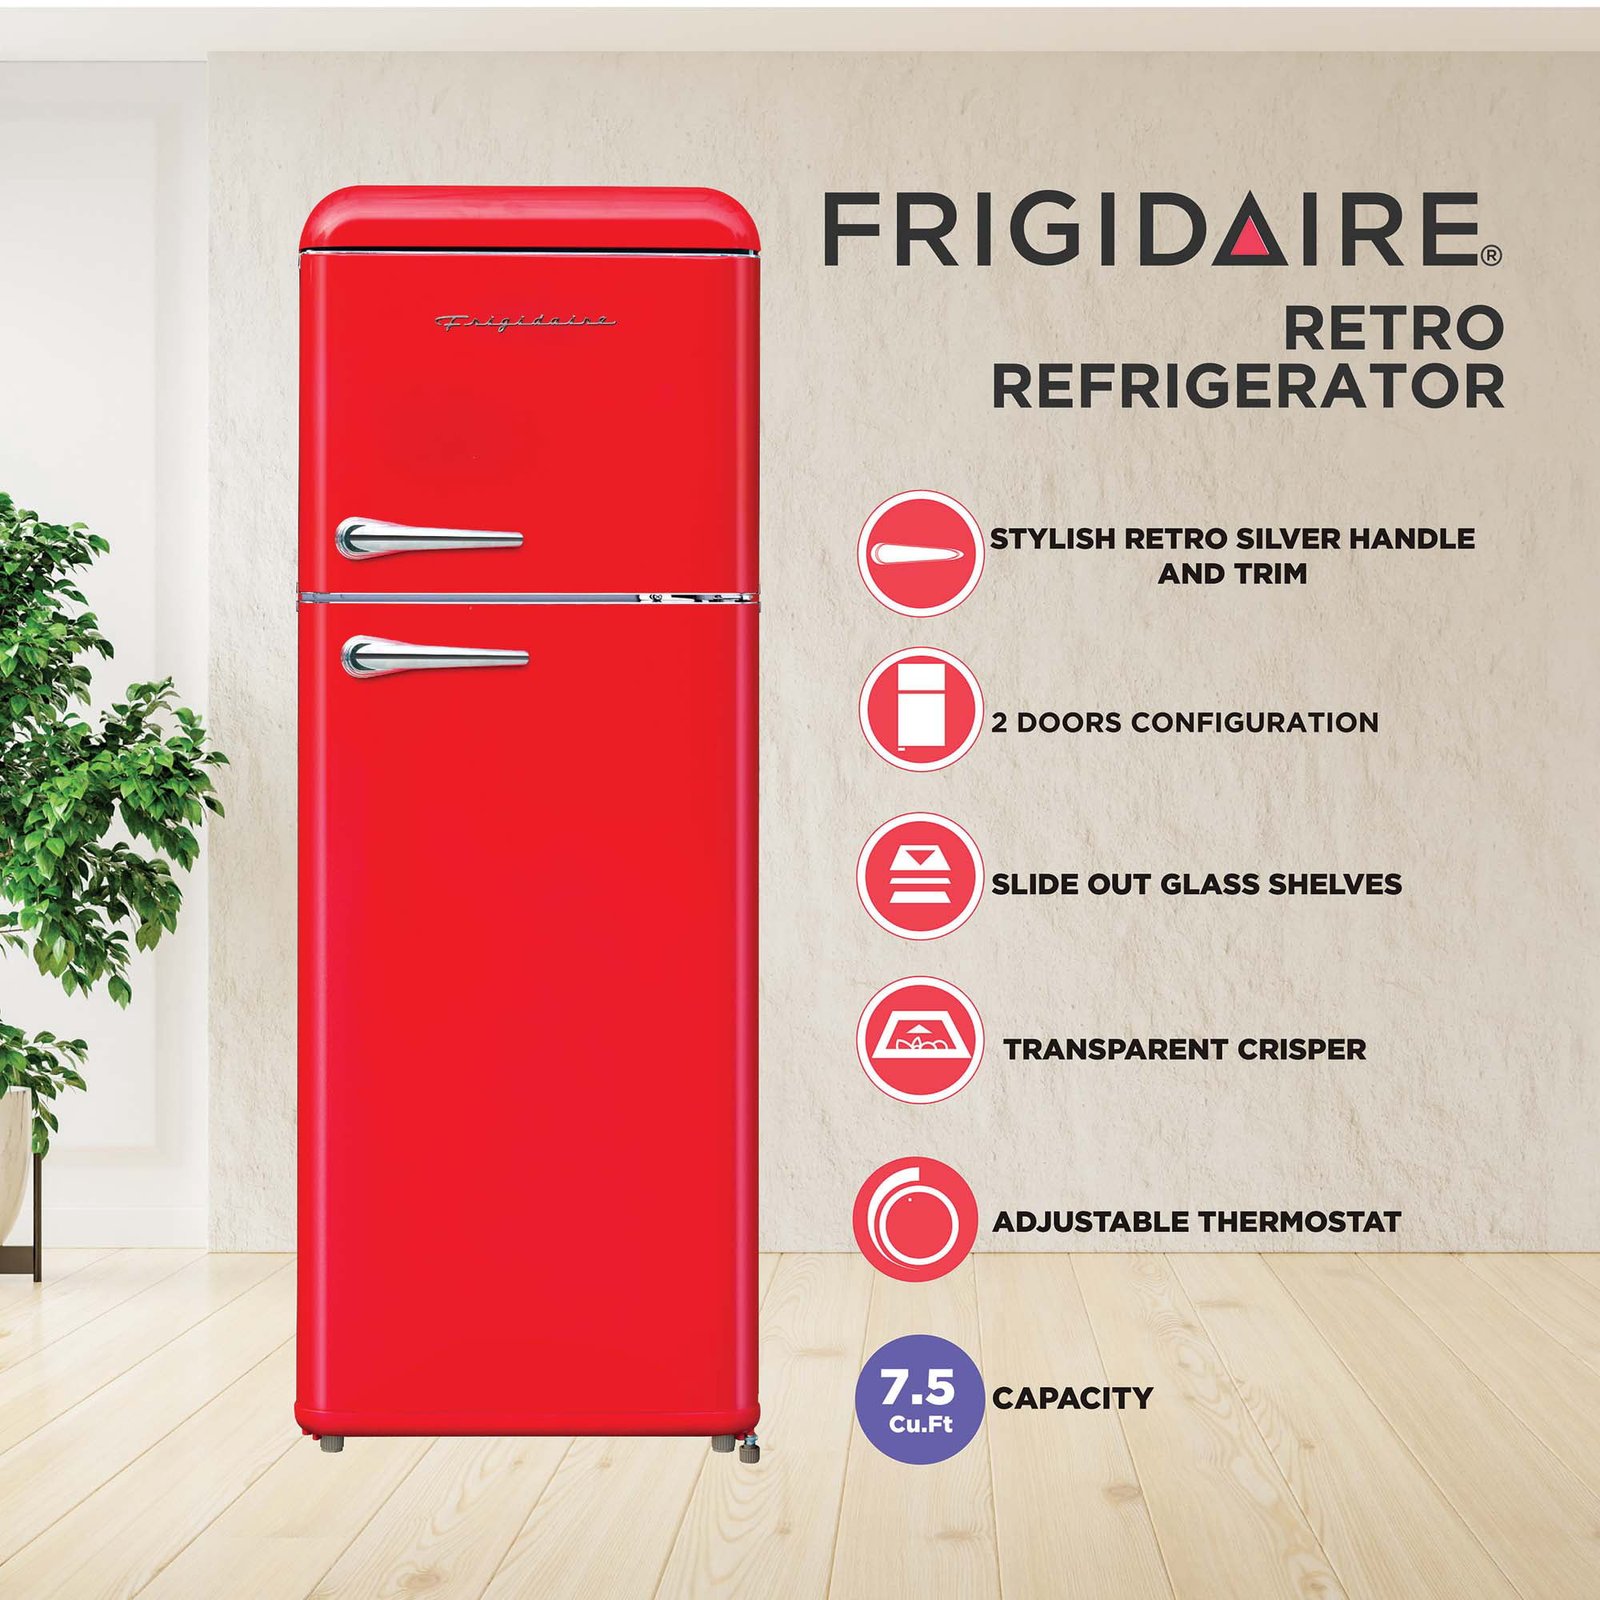 Frigidaire 7.5 Cu. Ft. Top Freezer Refrigerator in RED, Rounded Corners –  RETRO, EFR756 – The Market Depot